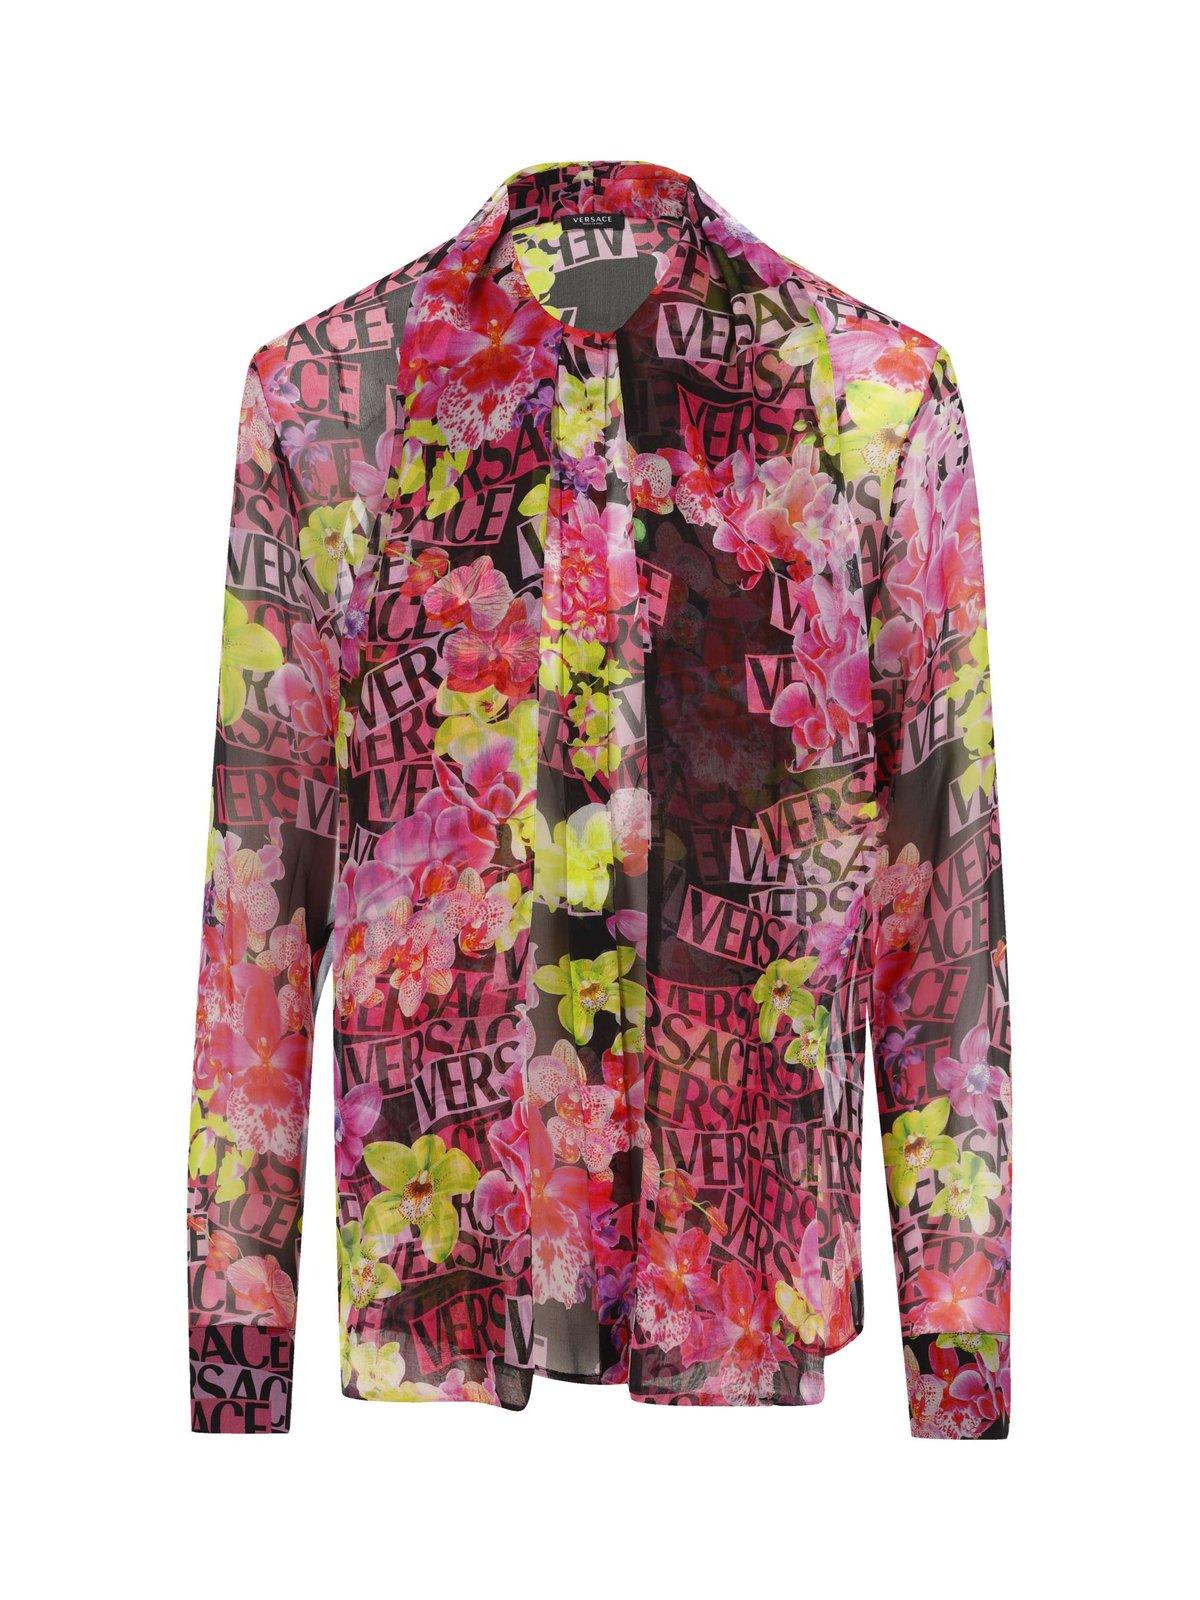 VERSACE ALLOVER FLORAL PRINTED LONG SLEEVED SHIRT